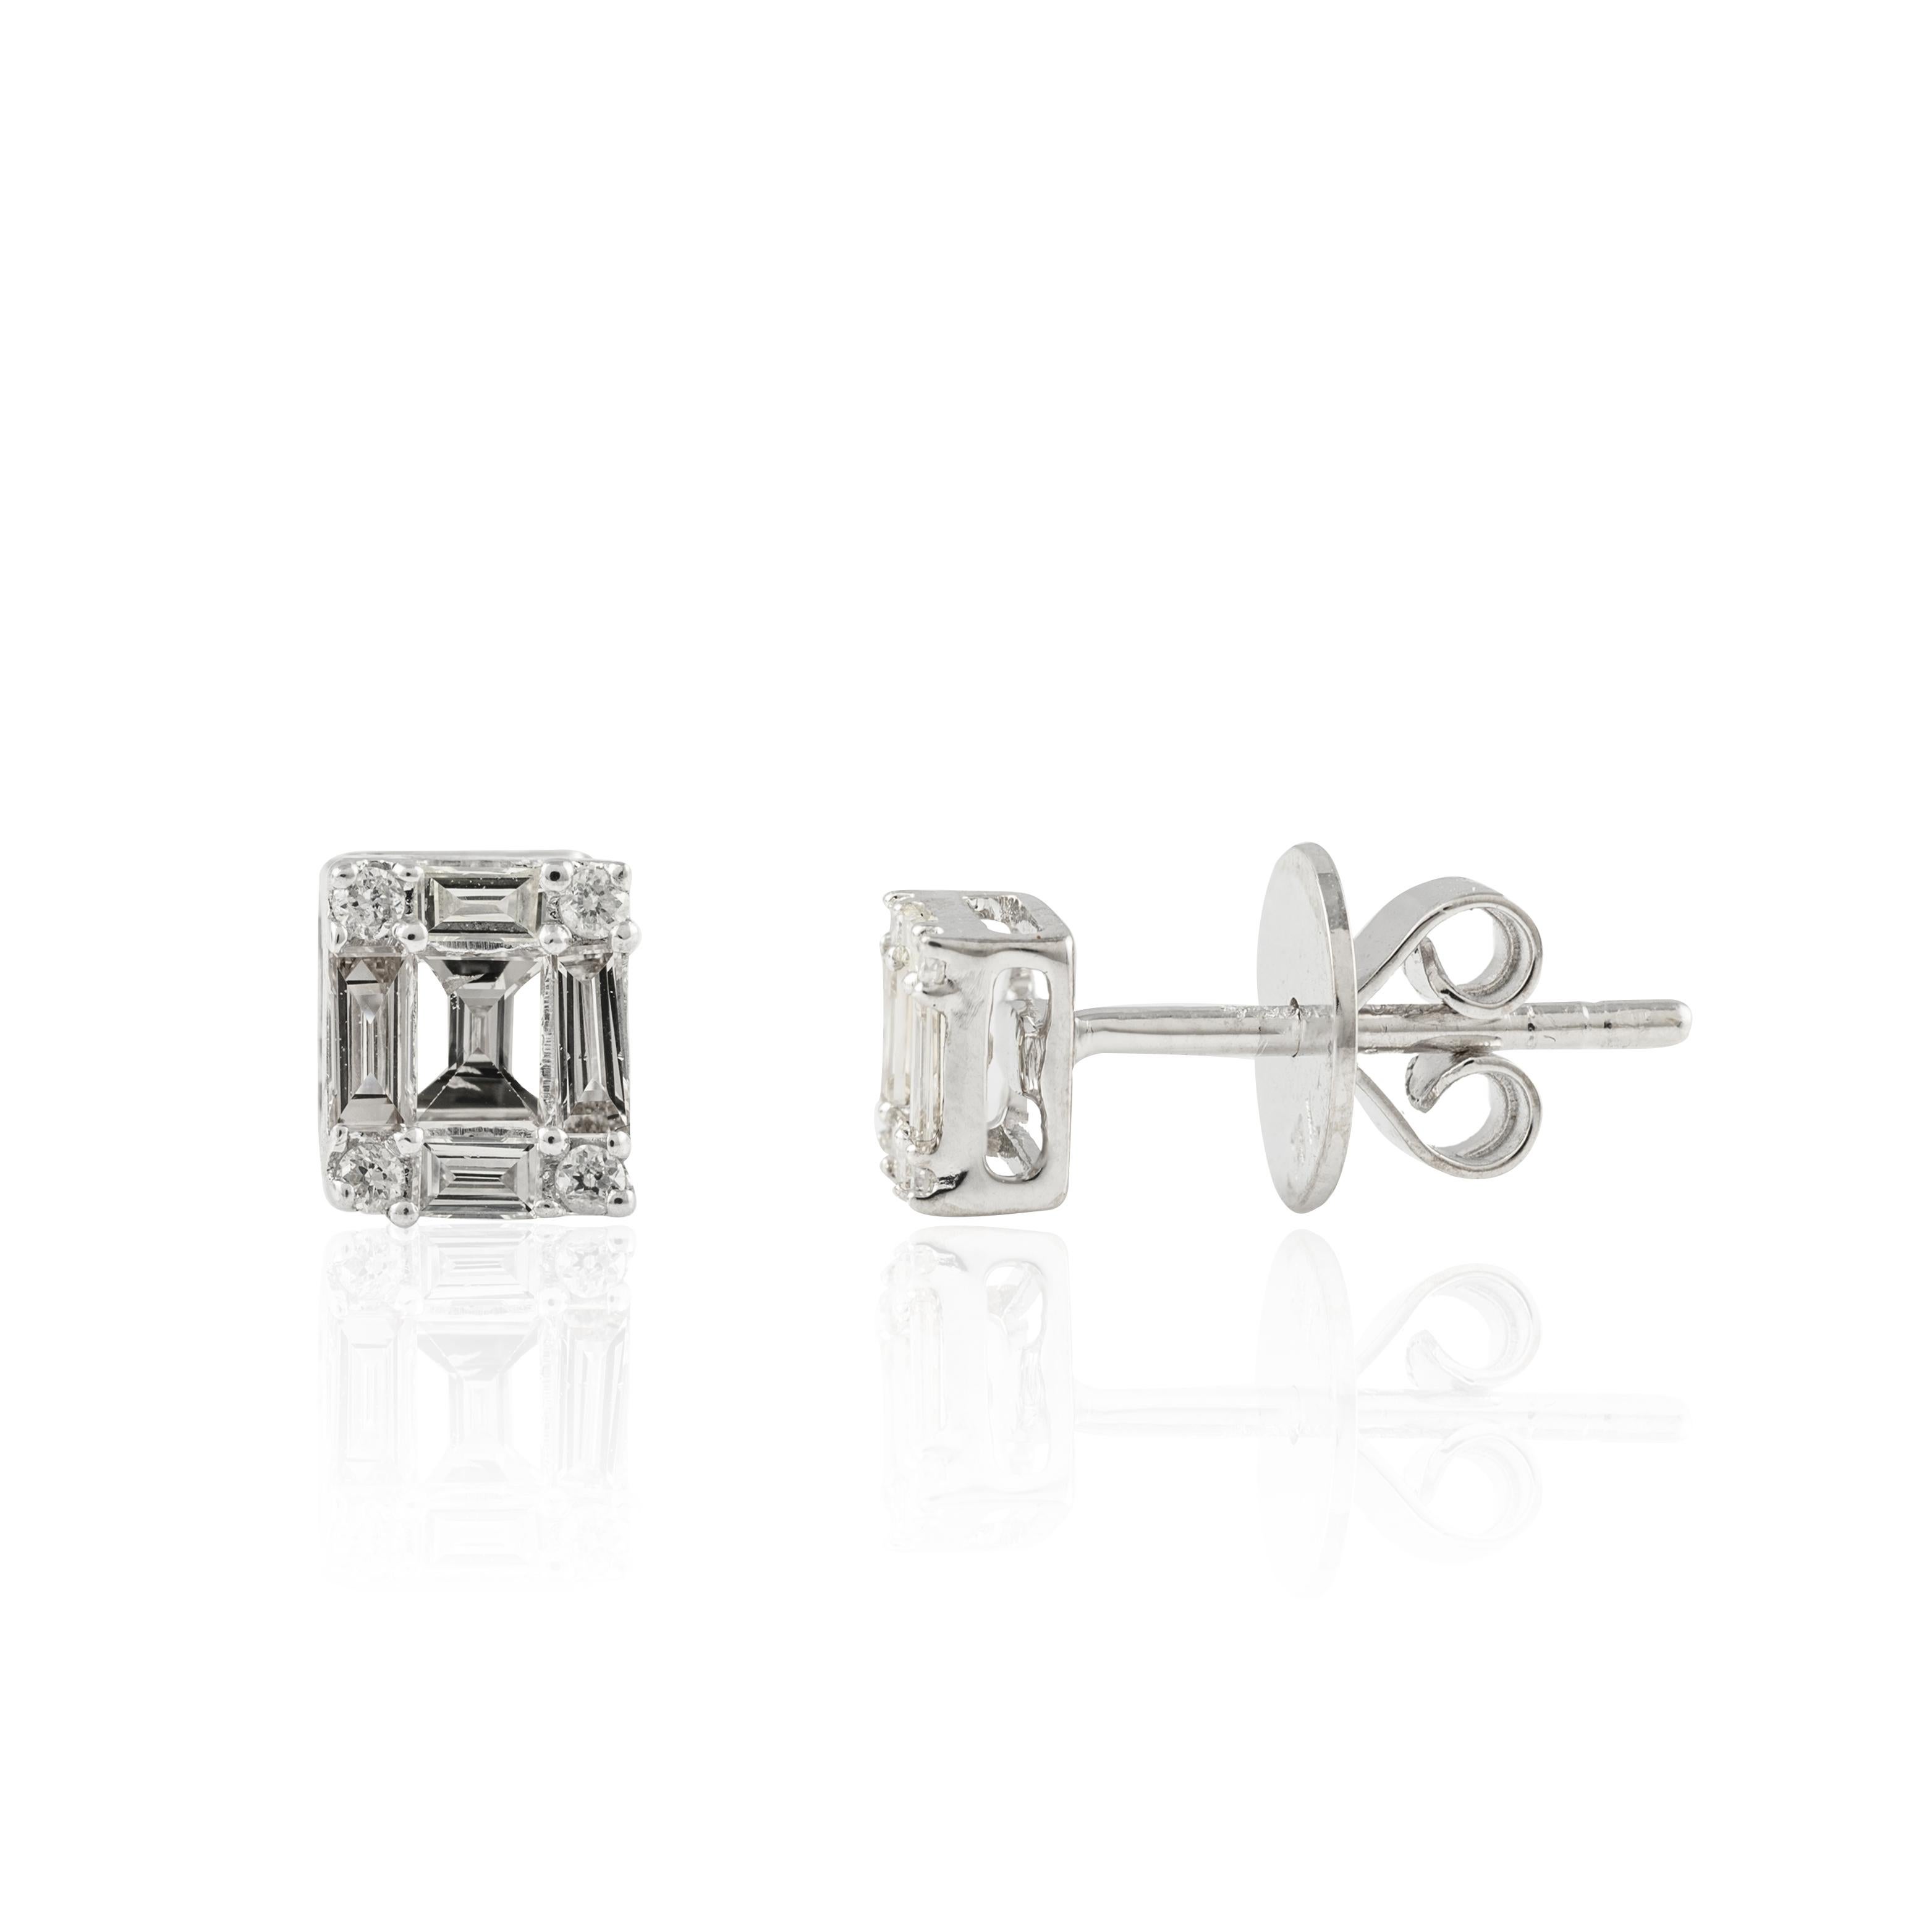 Mixed Cut Everyday Cluster Diamond Stud Earrings 18k Solid White Gold, Earrings For Women For Sale